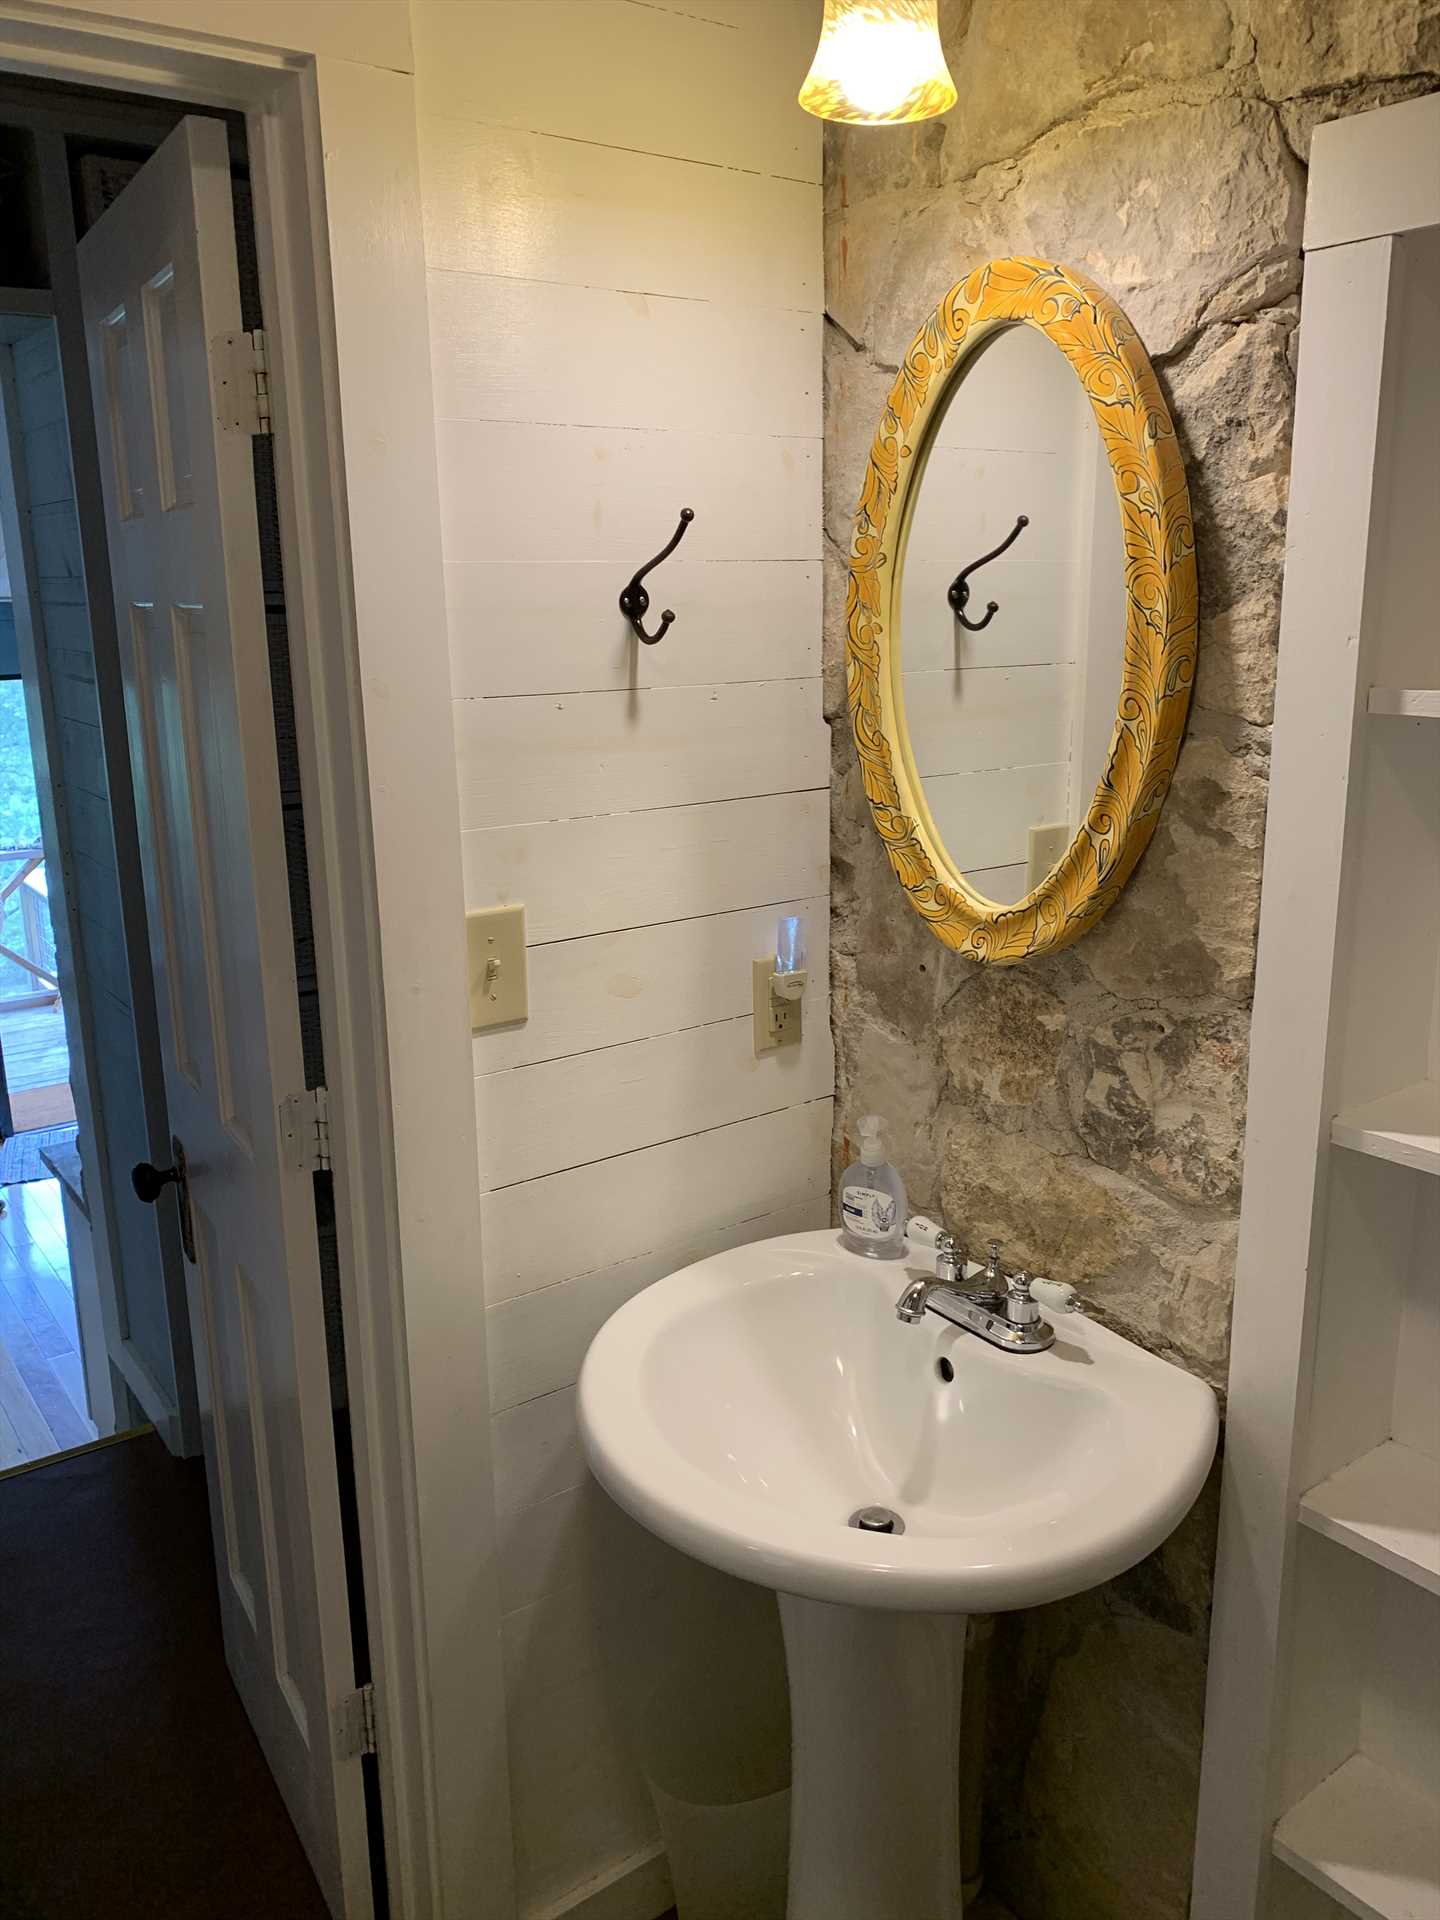                                                 The stone wall and pedestal-style vanity are just two examples of the unique touches throughout the retreat.